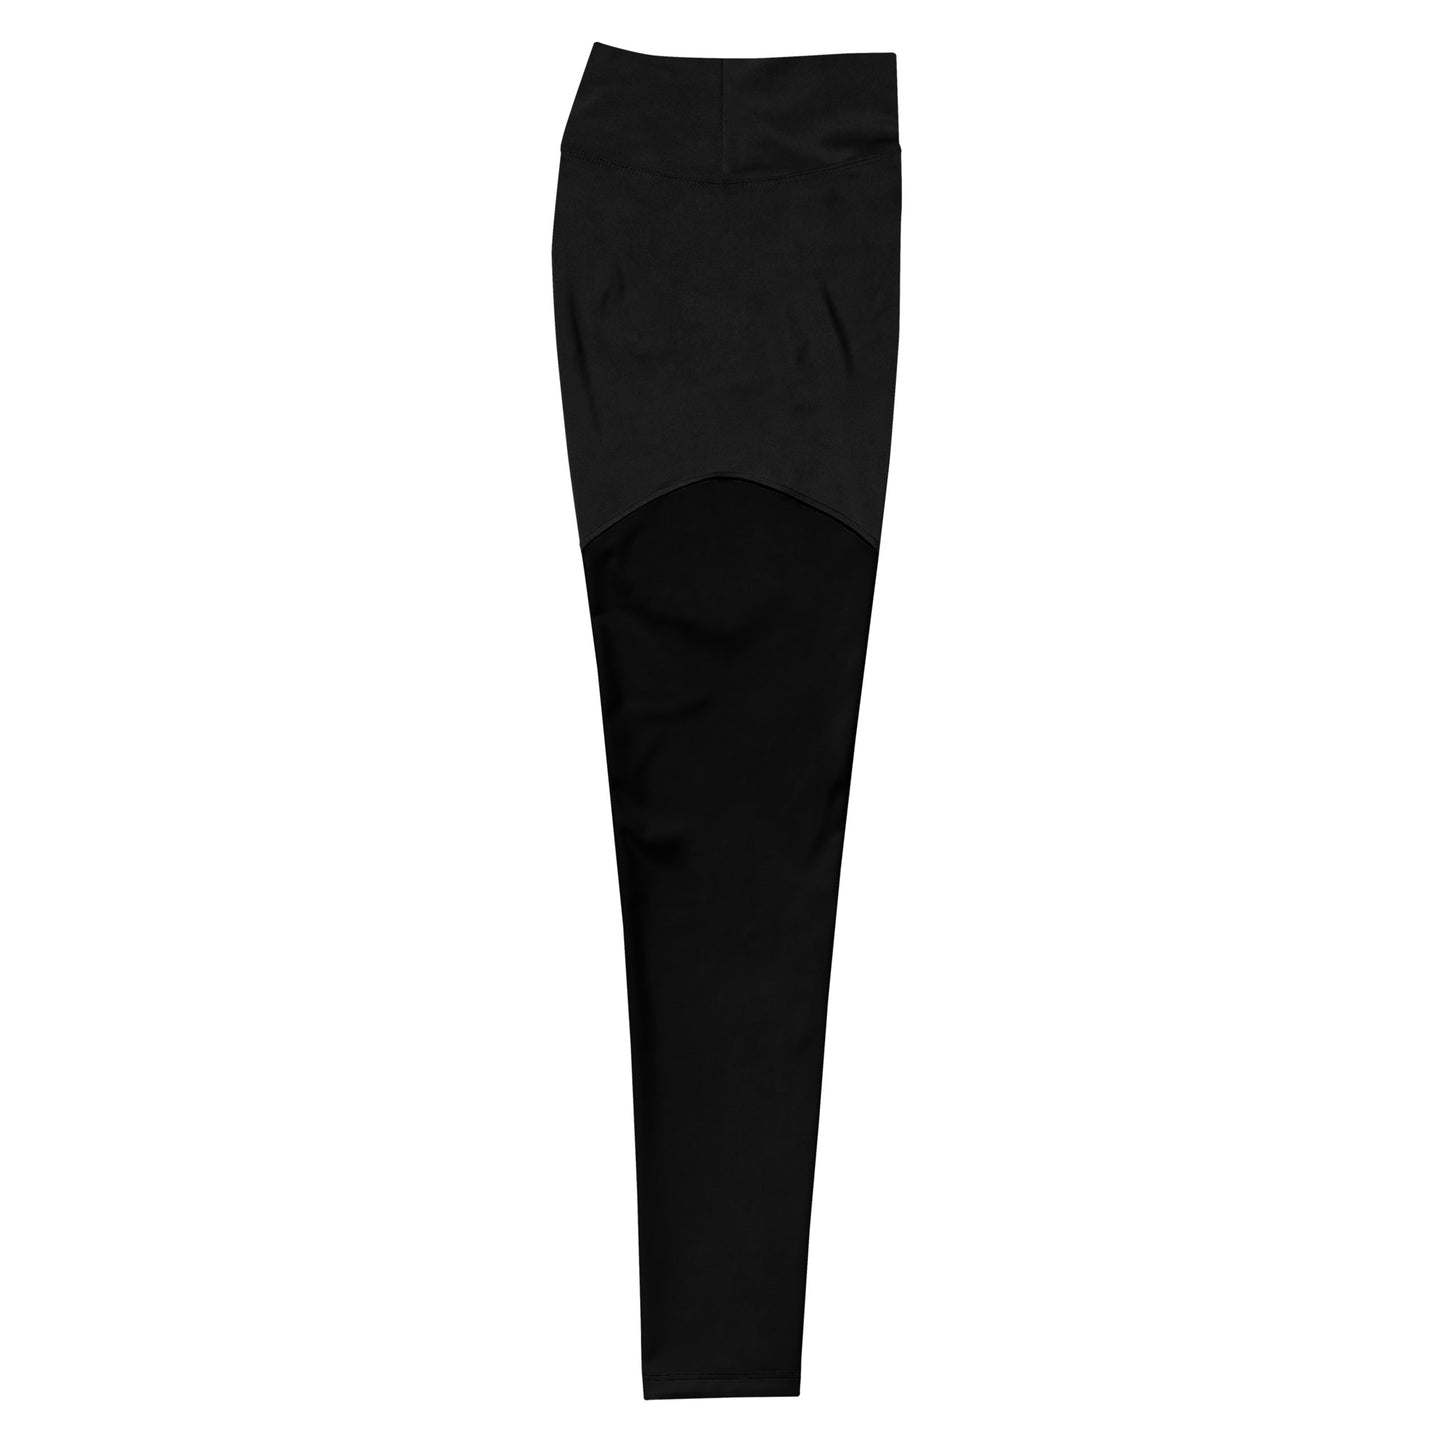 Red Weapon Stealth Sports Leggings